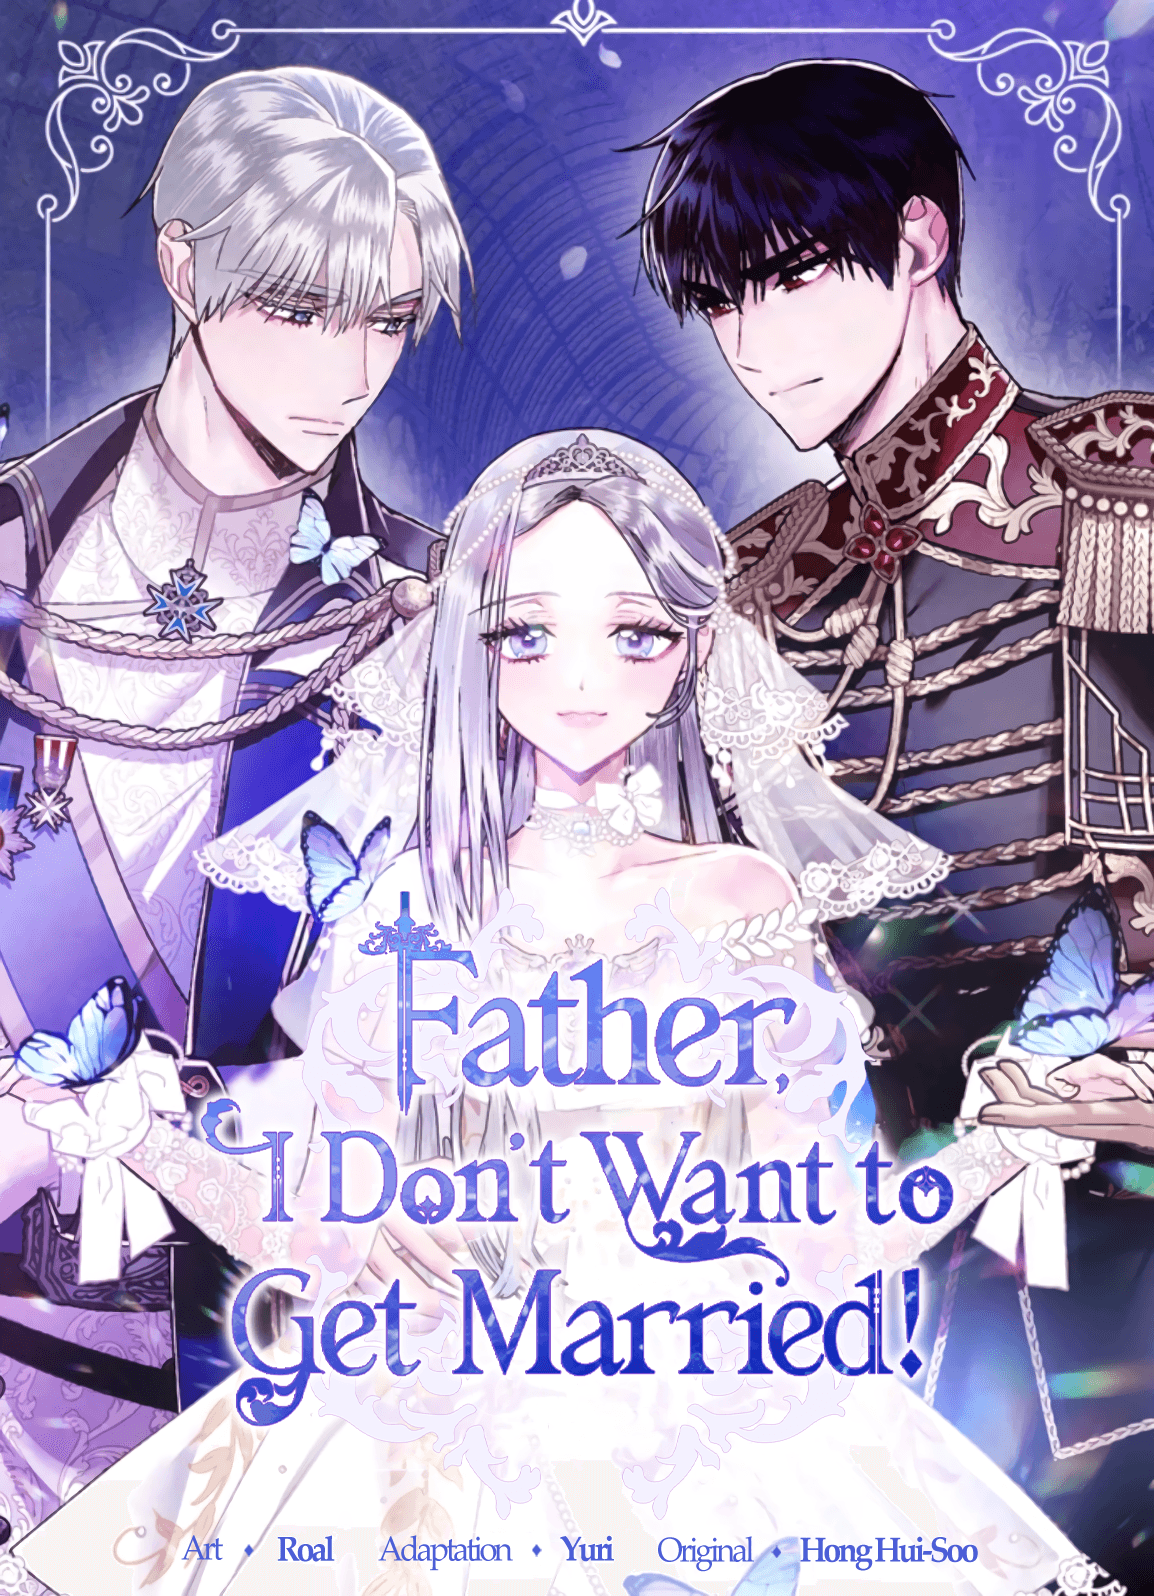 Father, I Don't Want This Marriage!